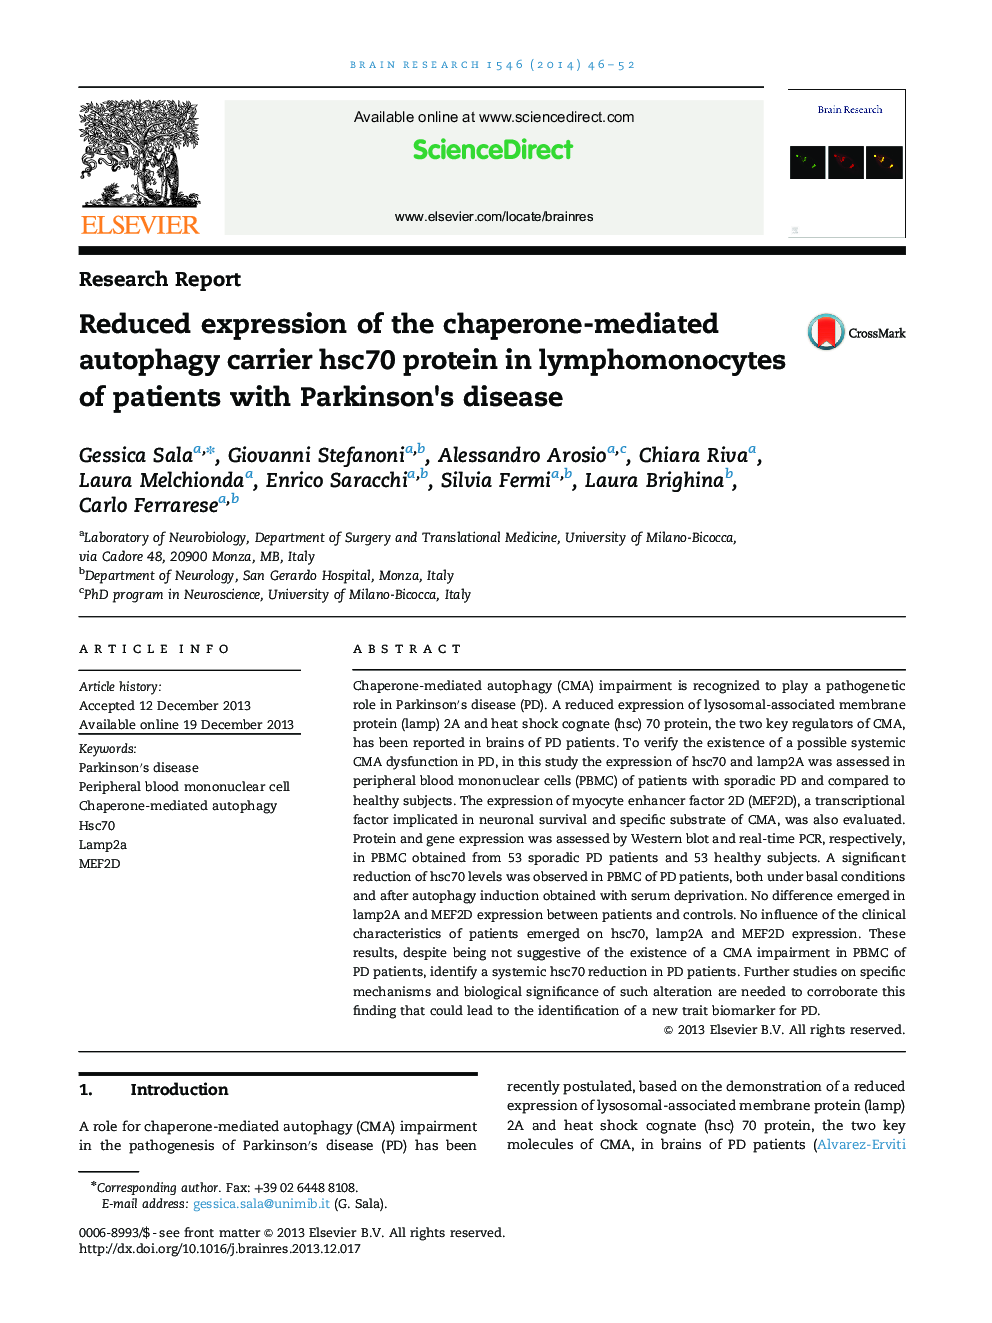 Reduced expression of the chaperone-mediated autophagy carrier hsc70 protein in lymphomonocytes of patients with Parkinson's disease